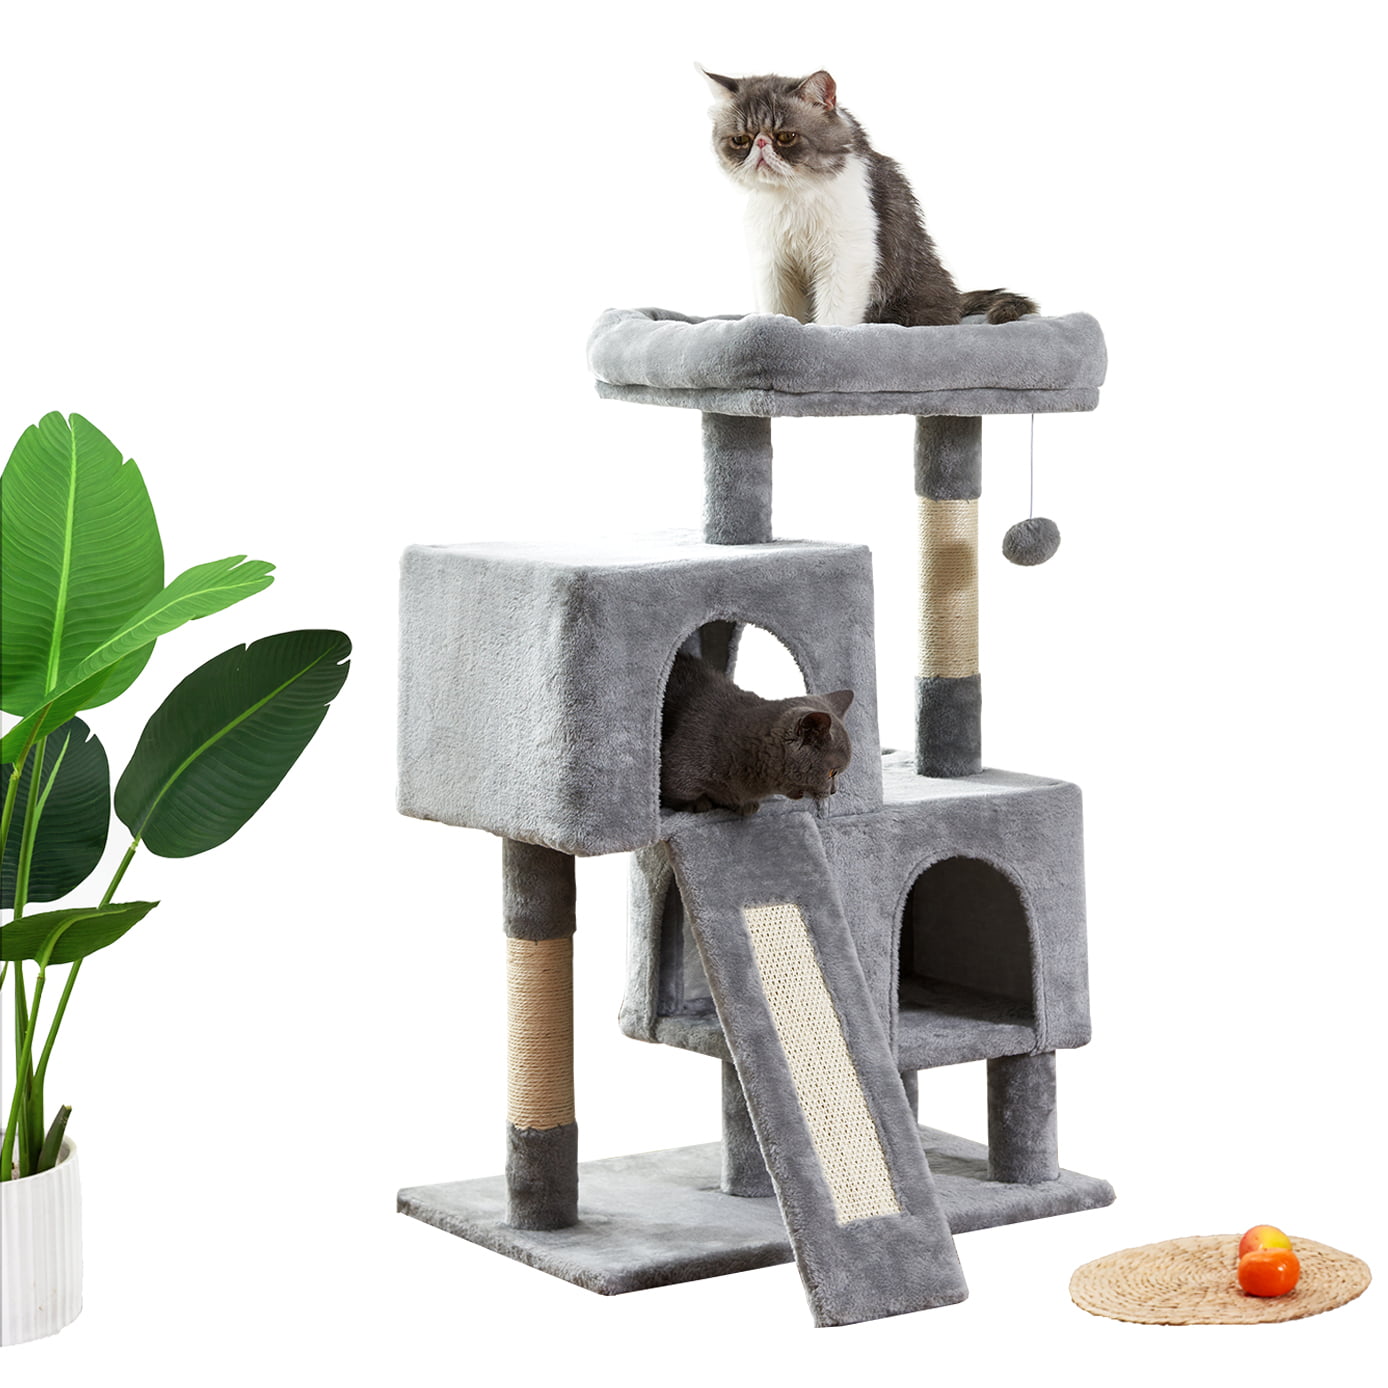 Poils bebe Cat Scratching Post and Activity Tree Natural Sisal Tower with Round Perch and Plush Ball Furniture Made for Kitten and Small Cat 